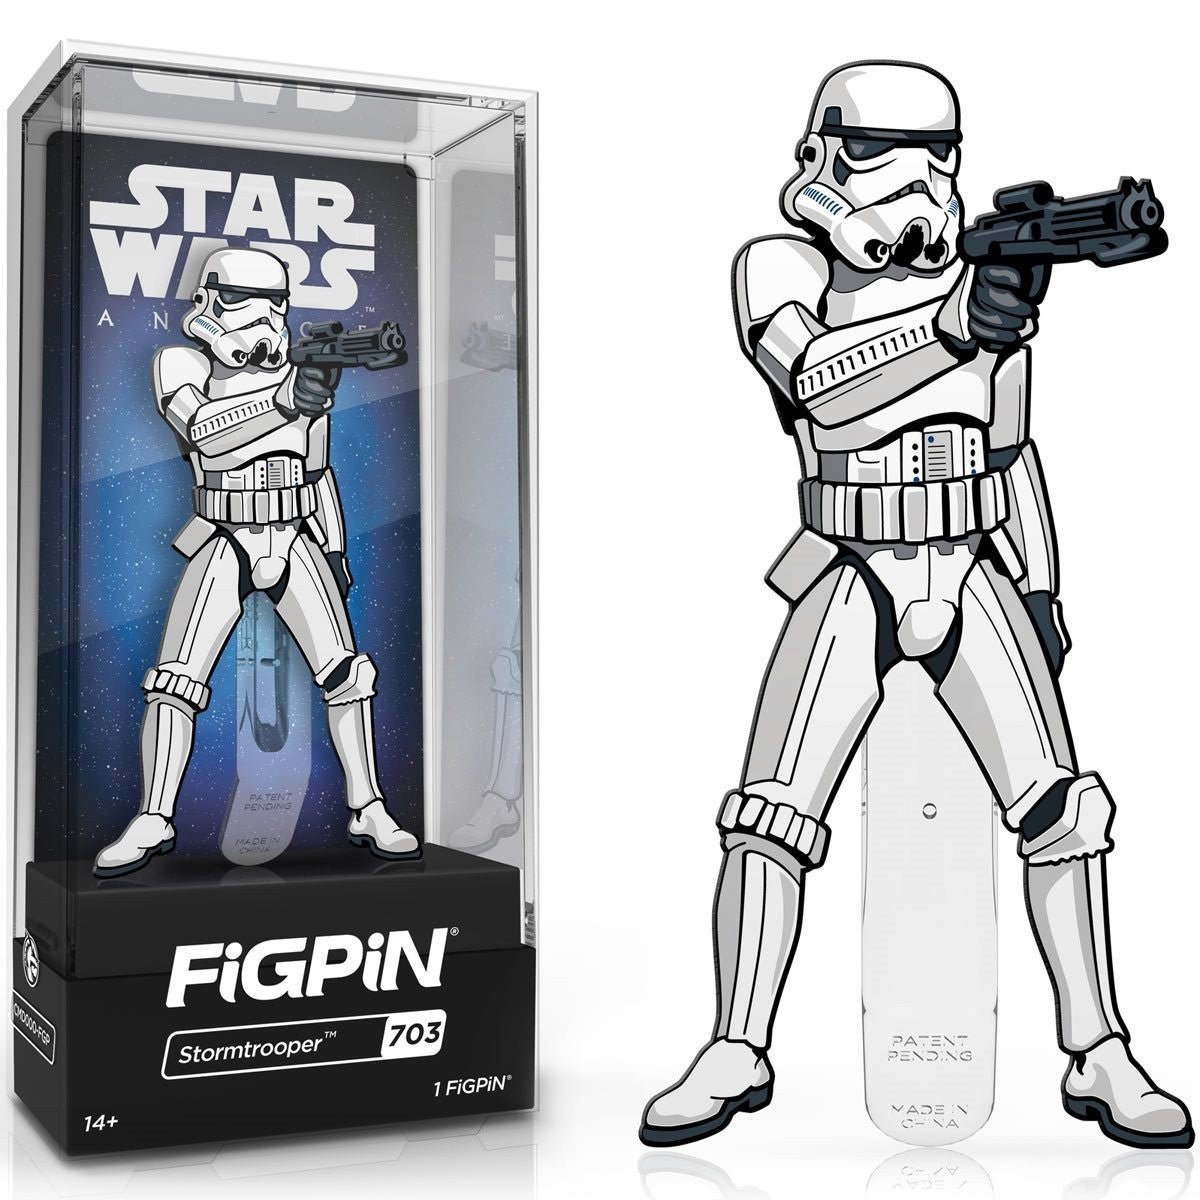 Star Wars: A New Hope Stormtrooper FiGPiN #703 (Blaster) - Simon's Collectibles